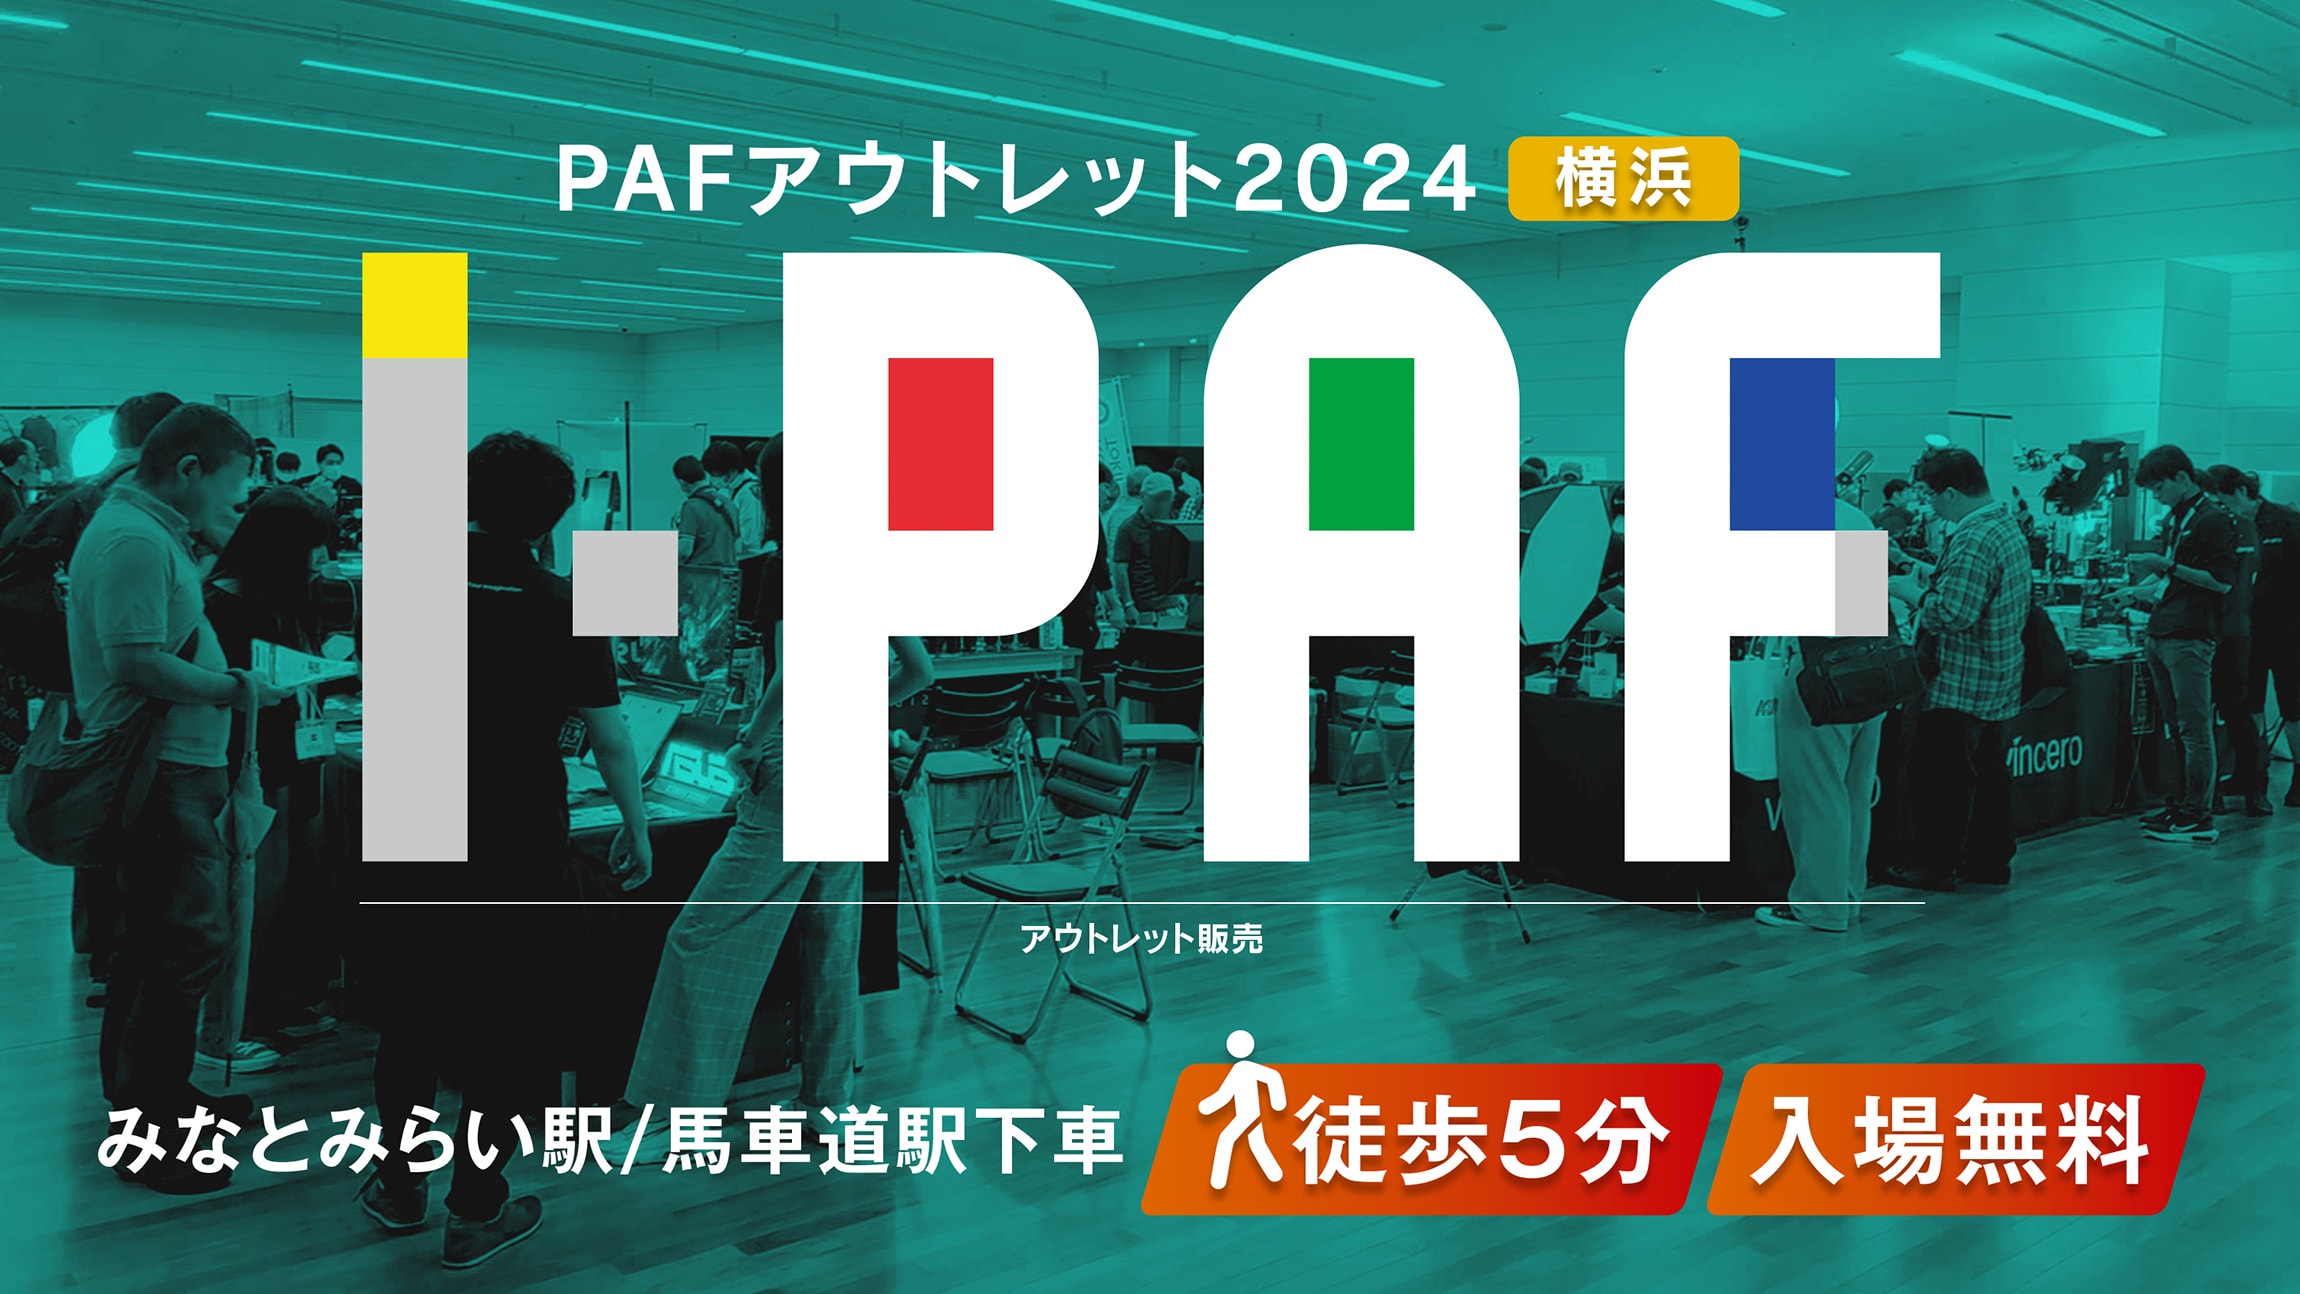 PAFアウトレット2024横浜